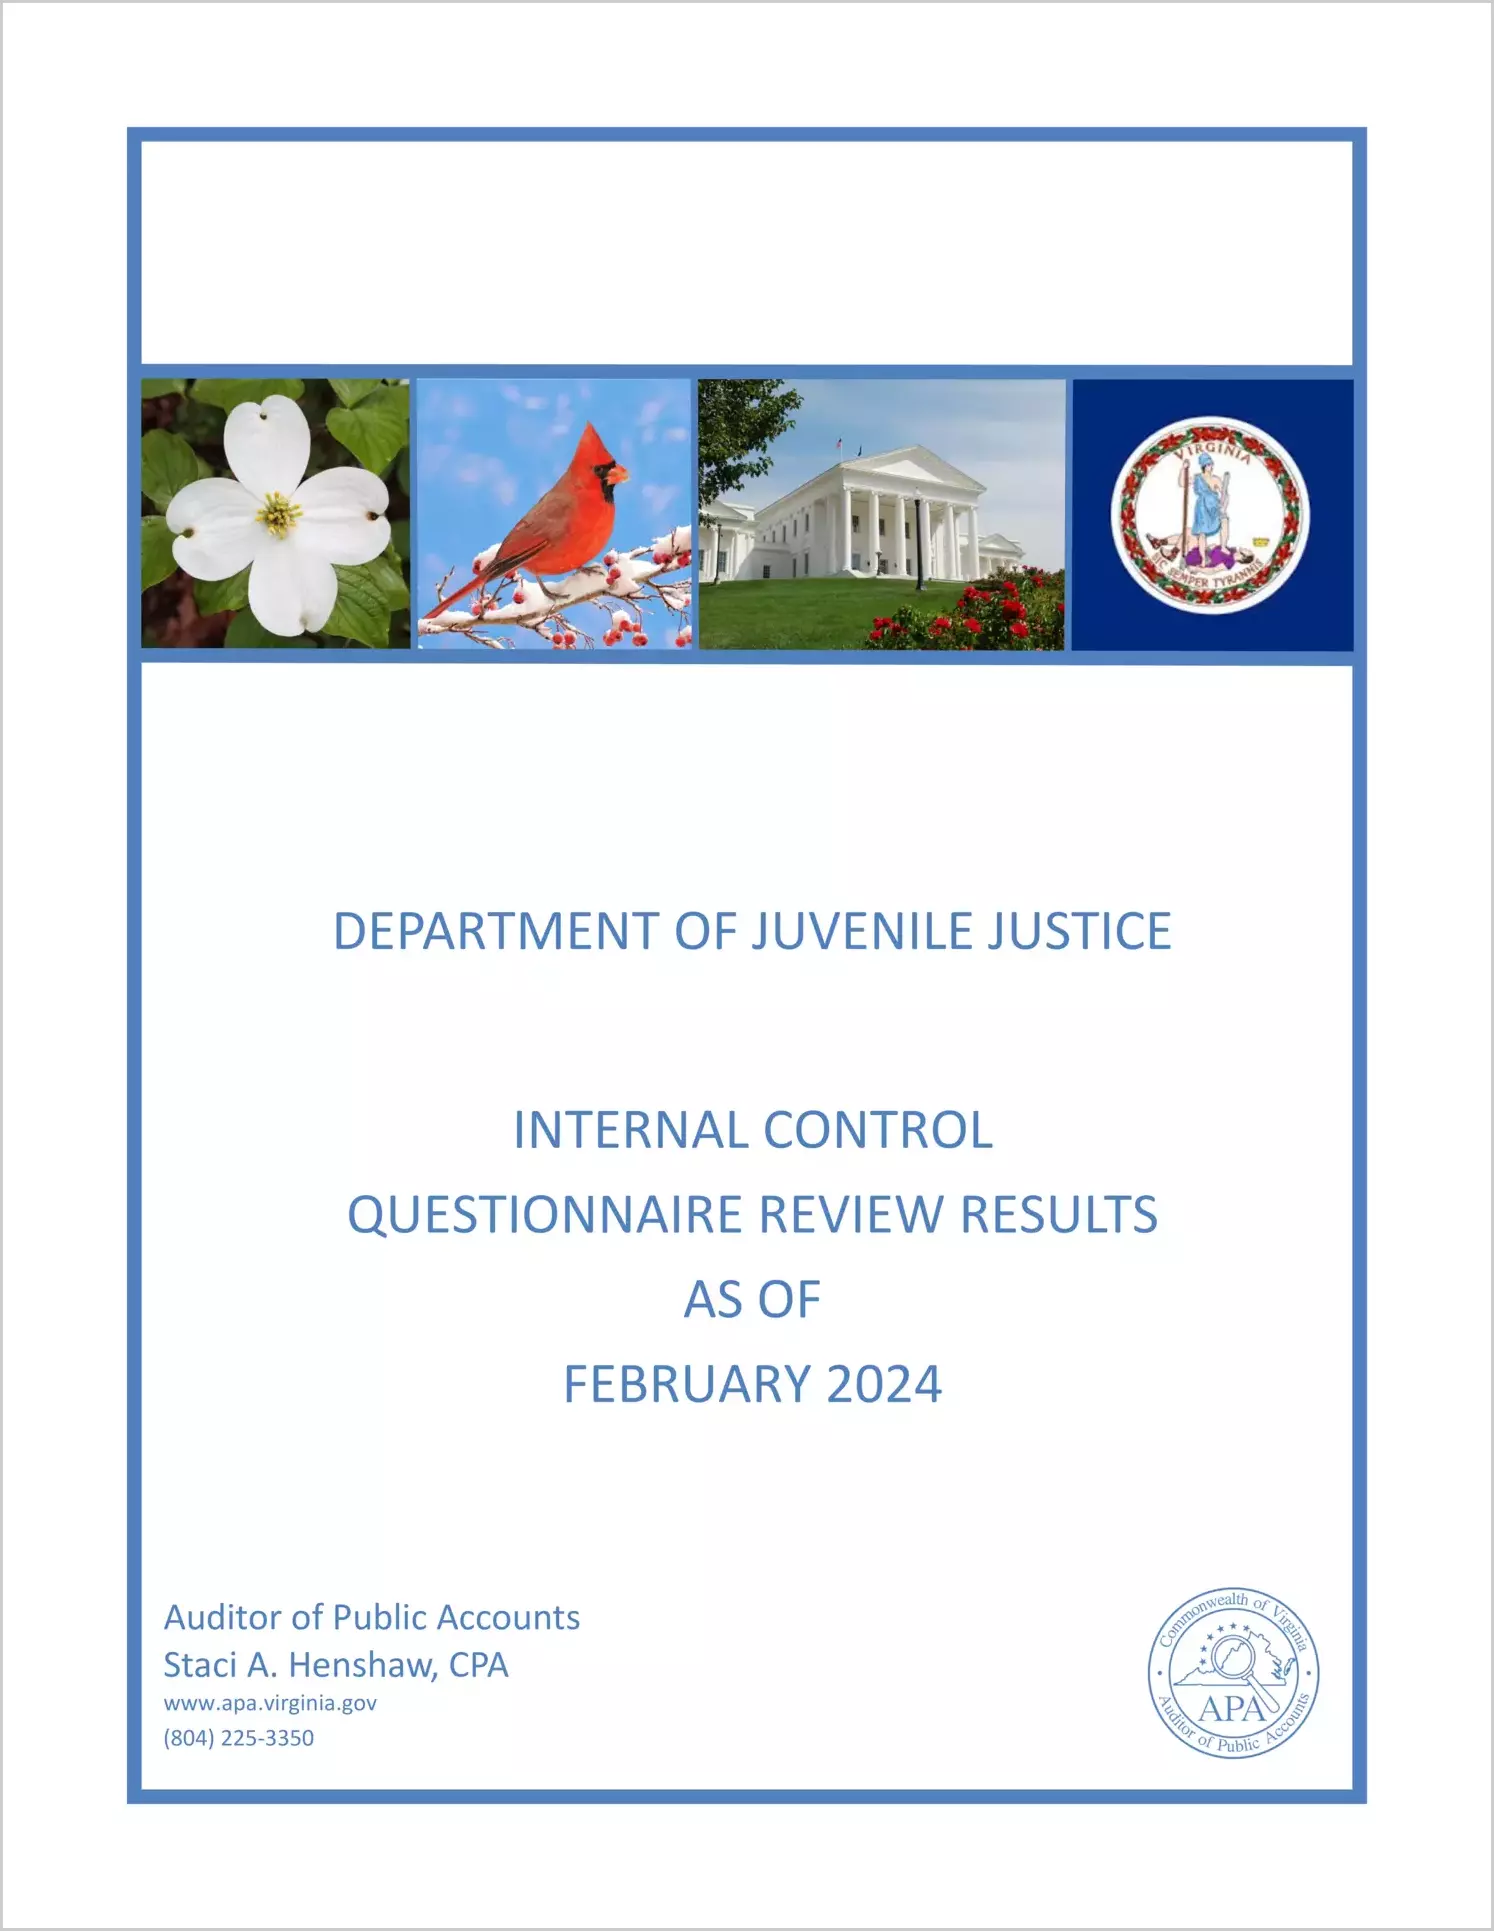 Department of Juvenile Justice Internal Control Questionnaire Review Results as of February 2024